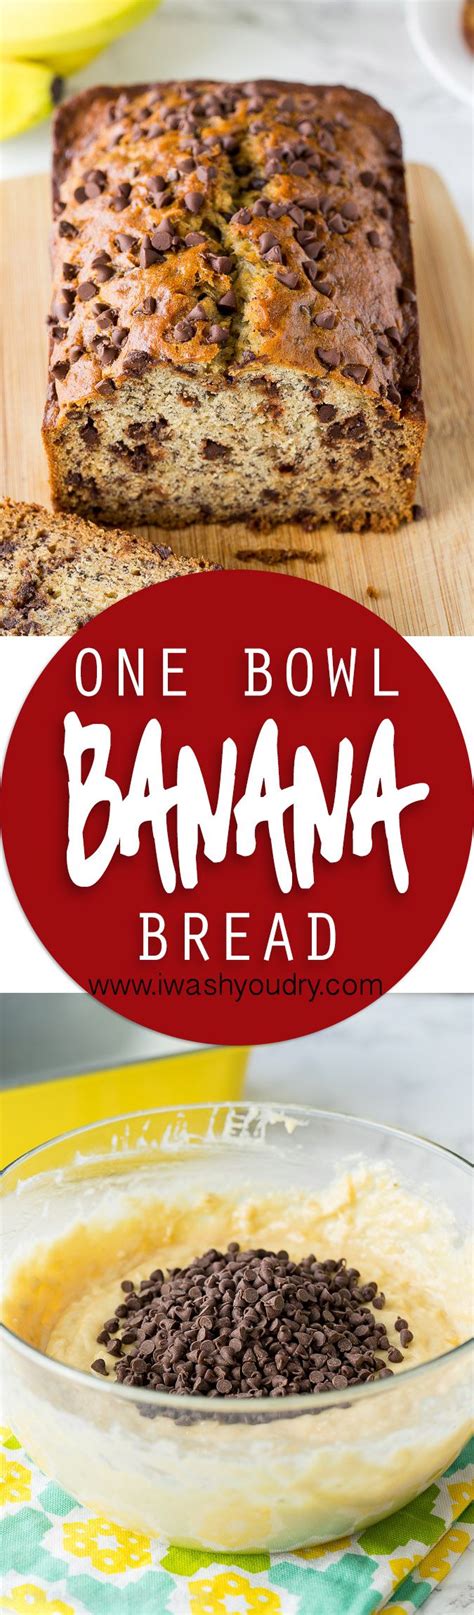 Wow This One Bowl Chocolate Chip Banana Bread Is So Easy And Seriously